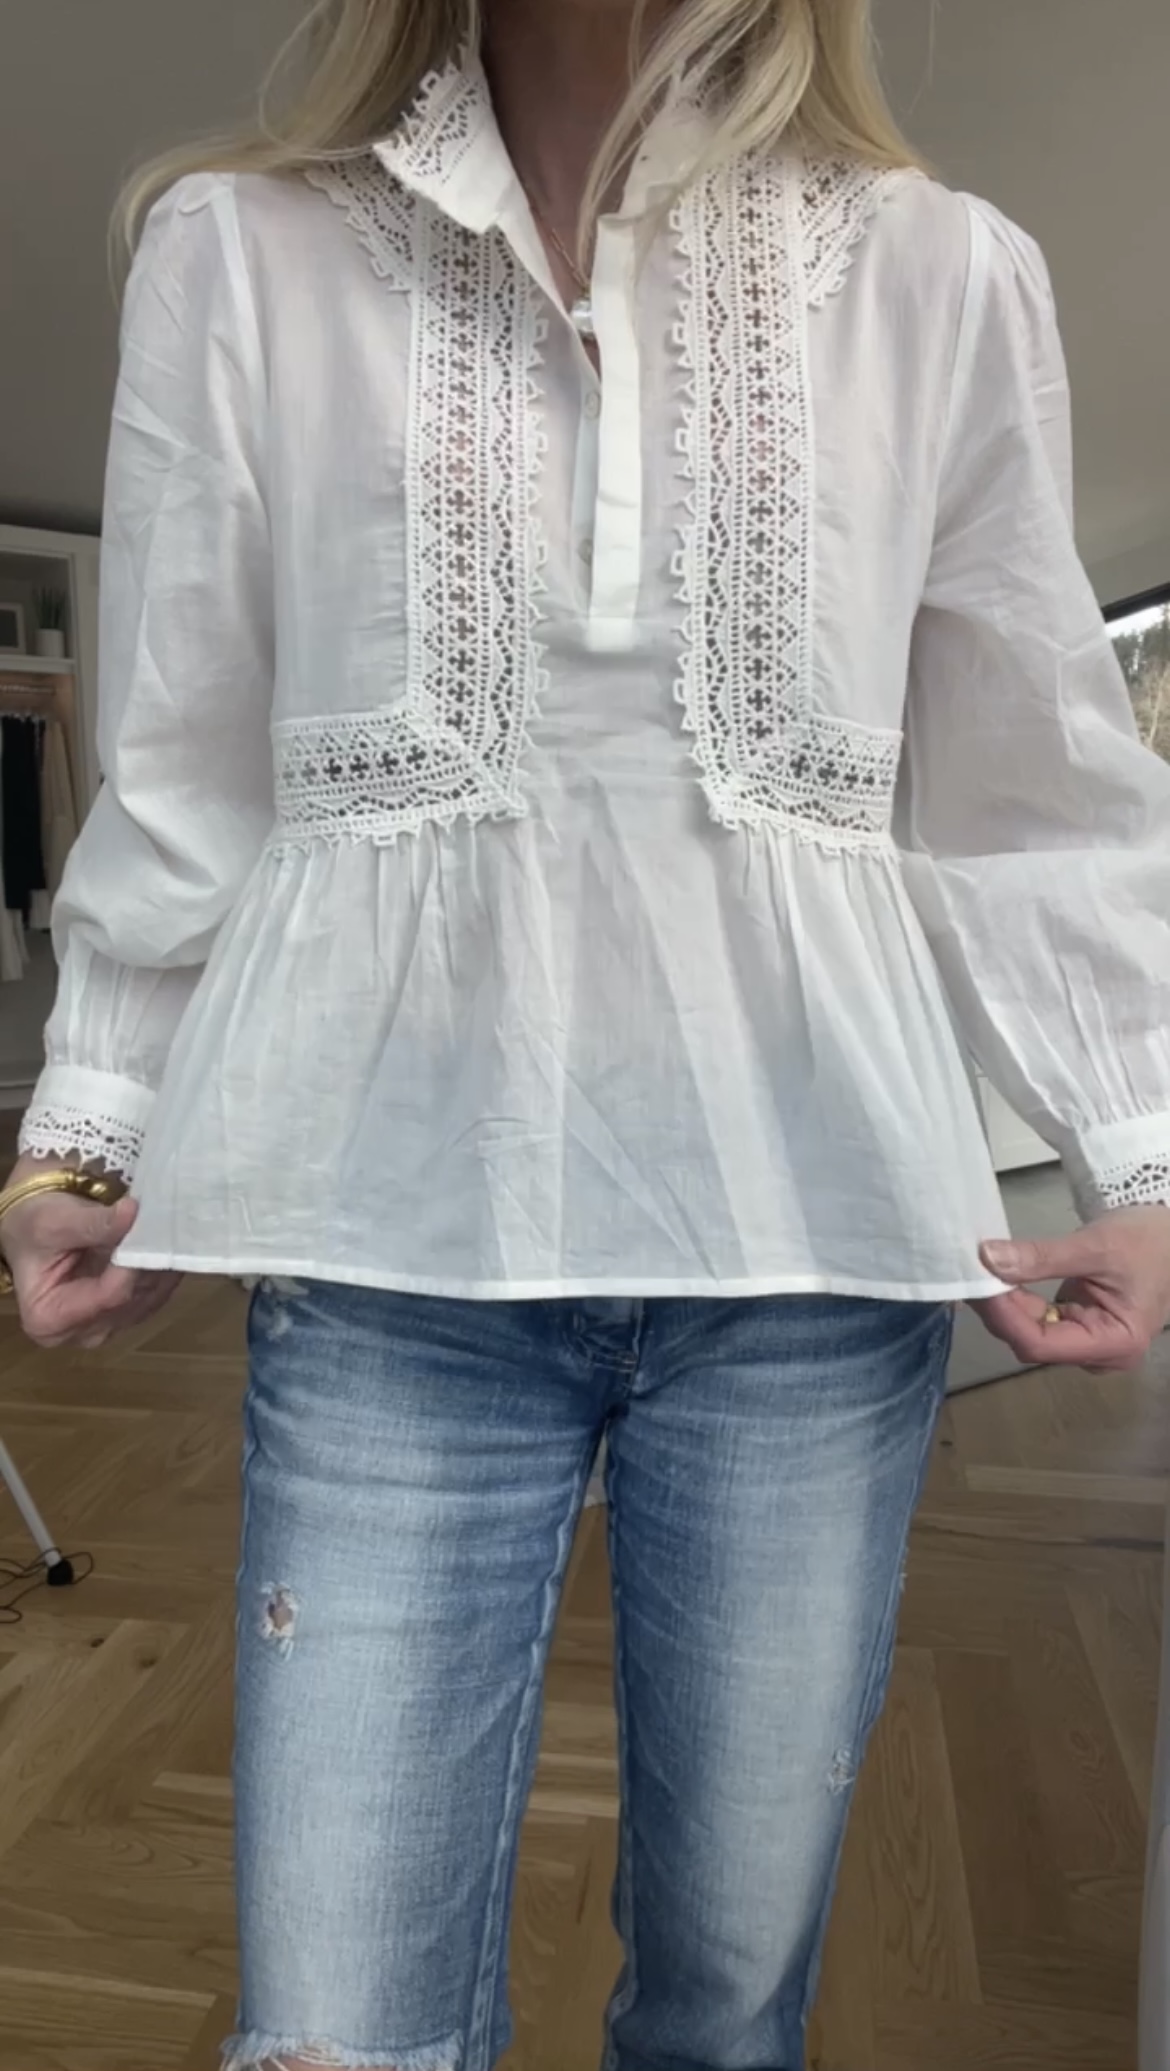 what to shop at shopbop sale, erin busbee, busbee style, white ba&sh selma blouse, moussy vintage lancaster jeans, Tops that cover arms, tops to hide flabby arms, summer tops, tops with sleeves, sleeves to cover arms, what to wear to cover arms in summer